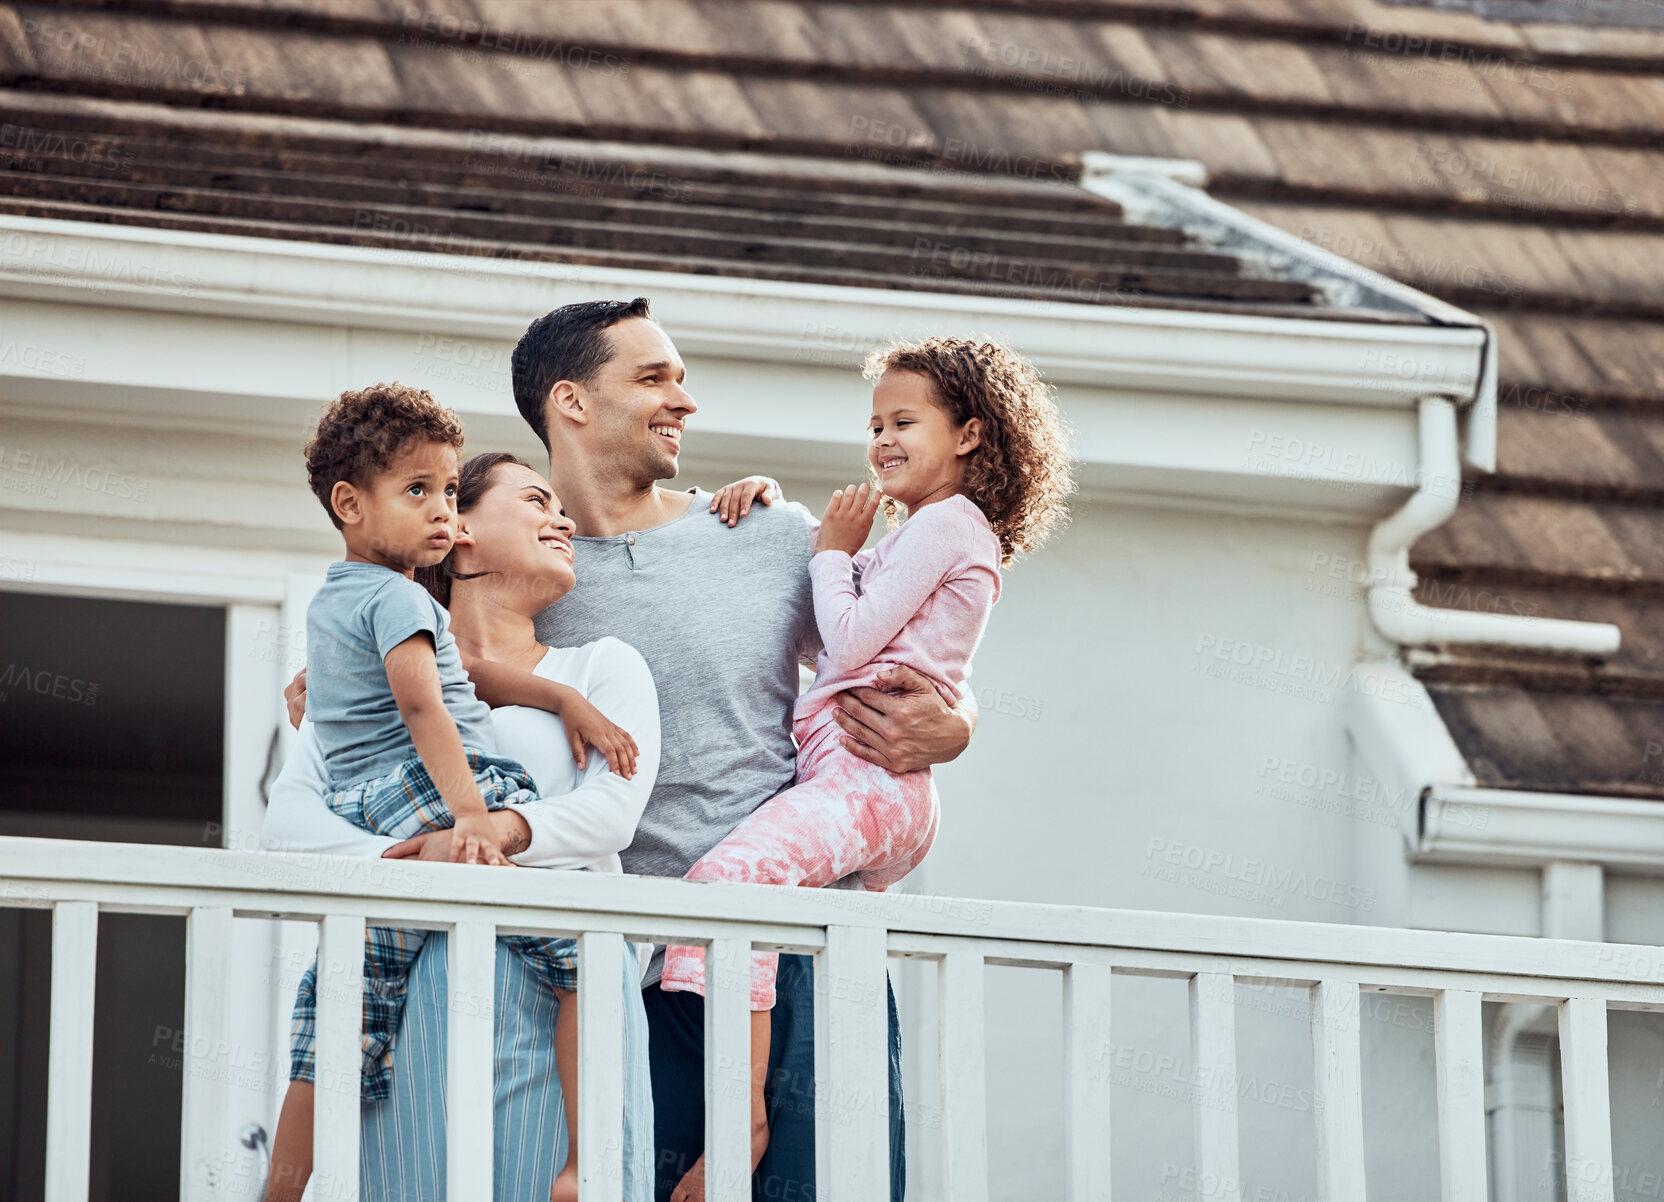 Buy stock photo Happy young mixed race family with two children standing outside on their balcony at home. Loving couple with their daughter and son wearing pyjamas and enjoying their new house